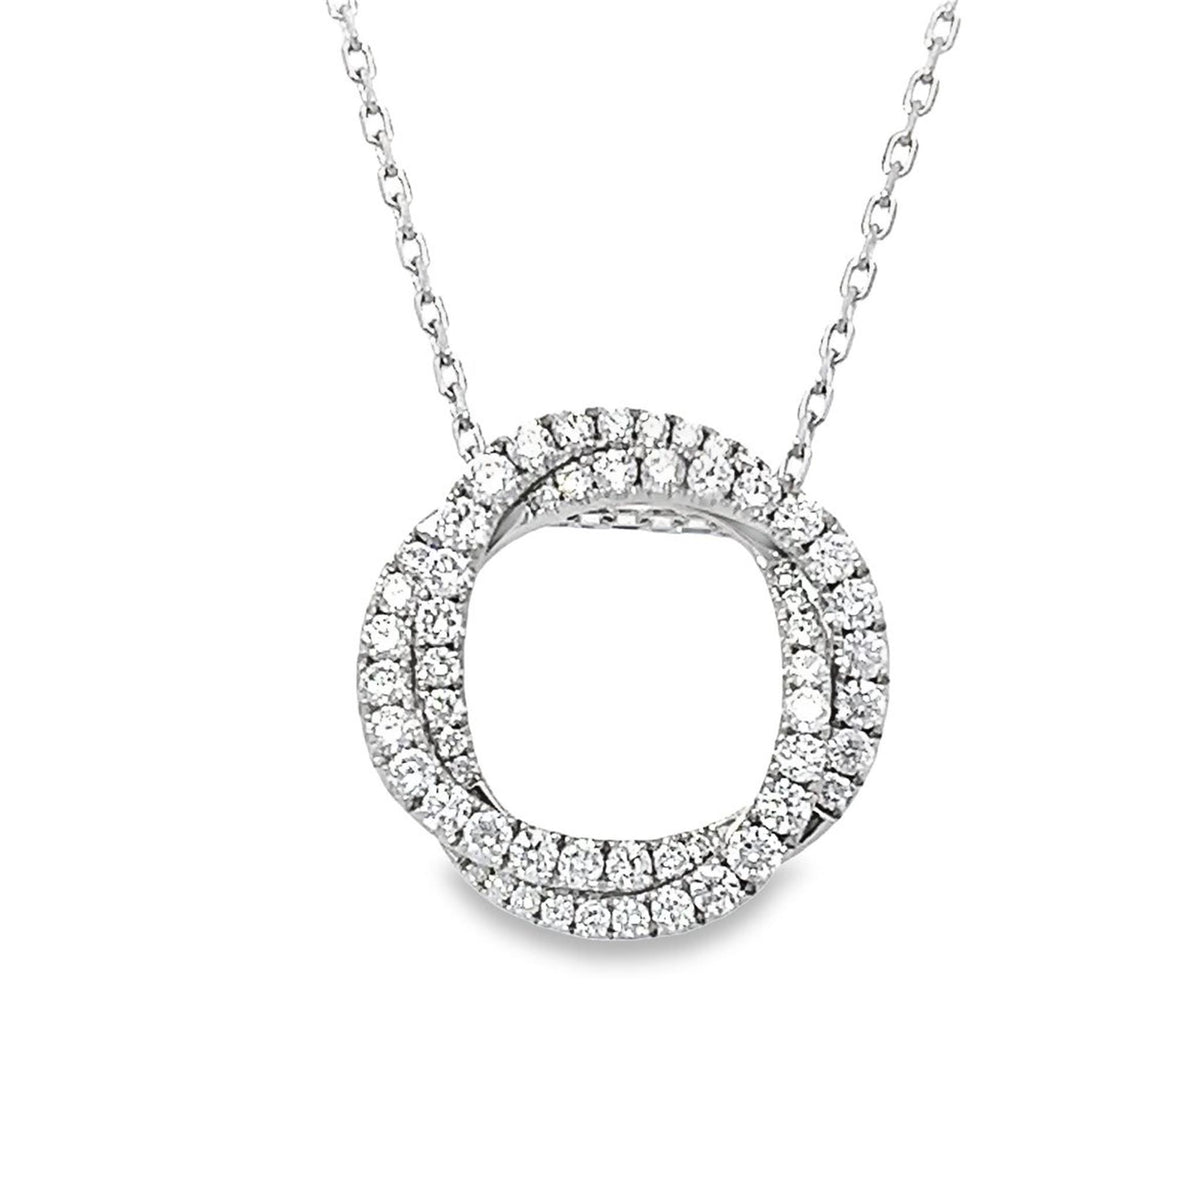 Frederic Sage 14Kt White Gold Twist Halo Pendant with 1.20cttw Natural Diamonds